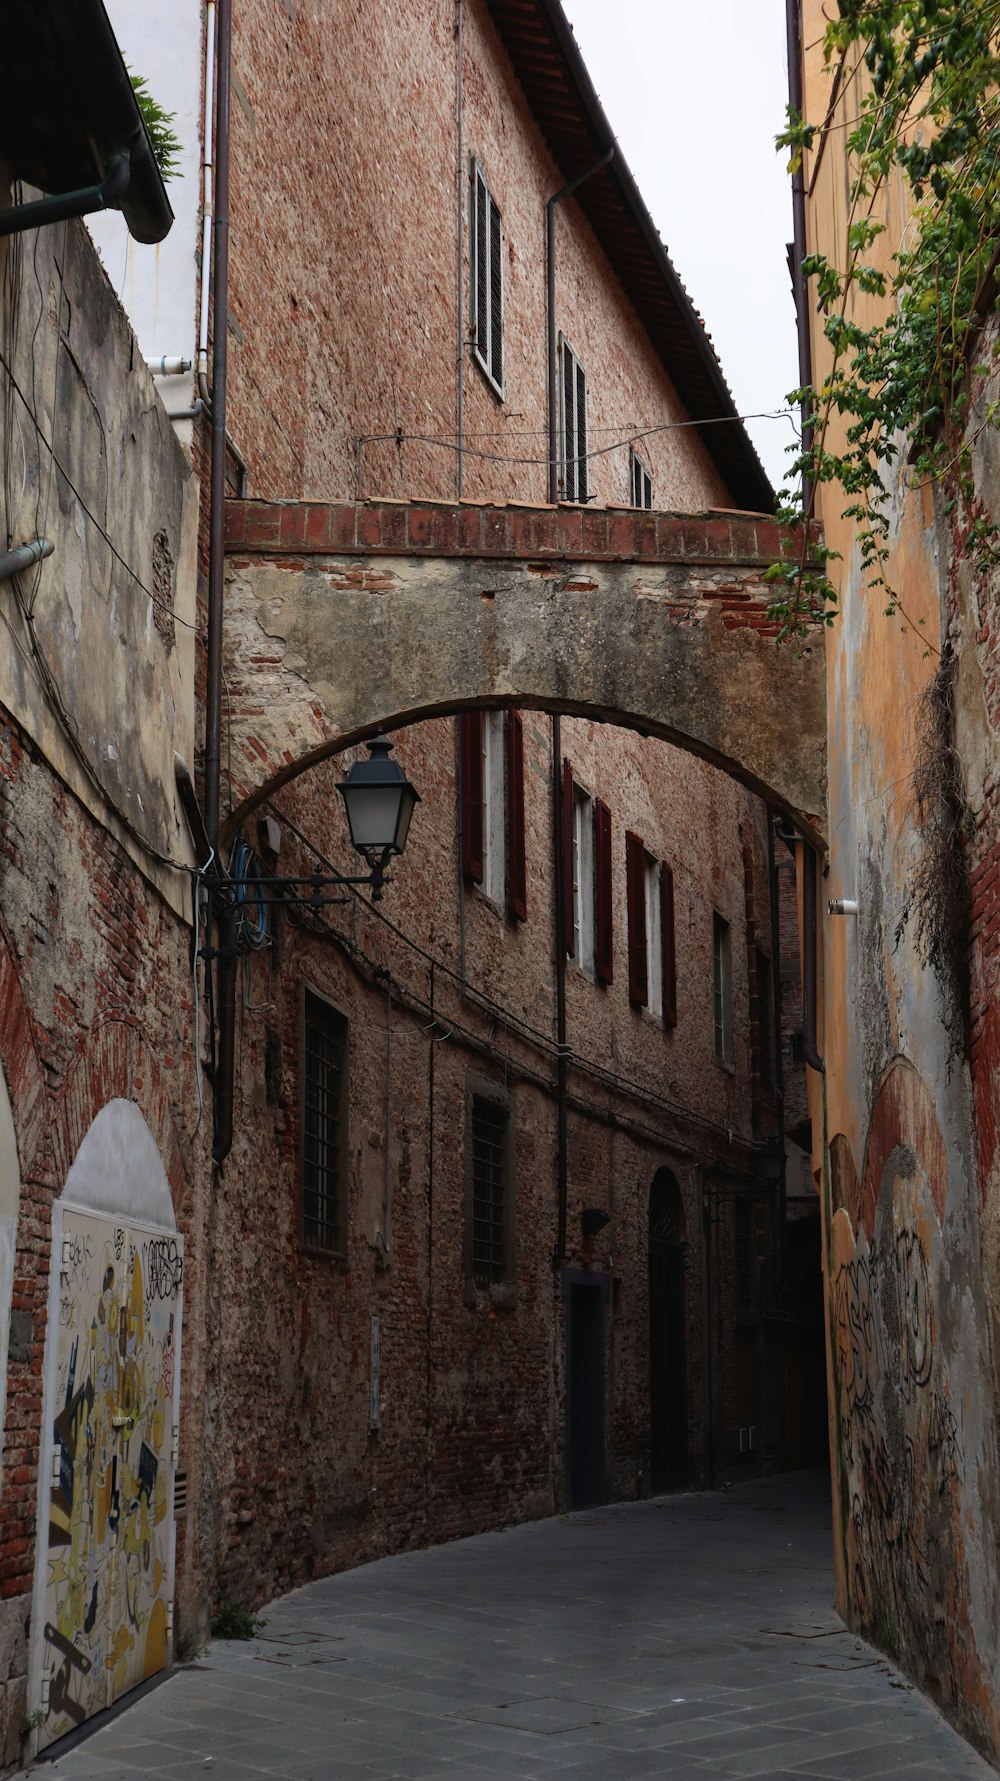 a narrow alleyway with a brick building and arched doorways